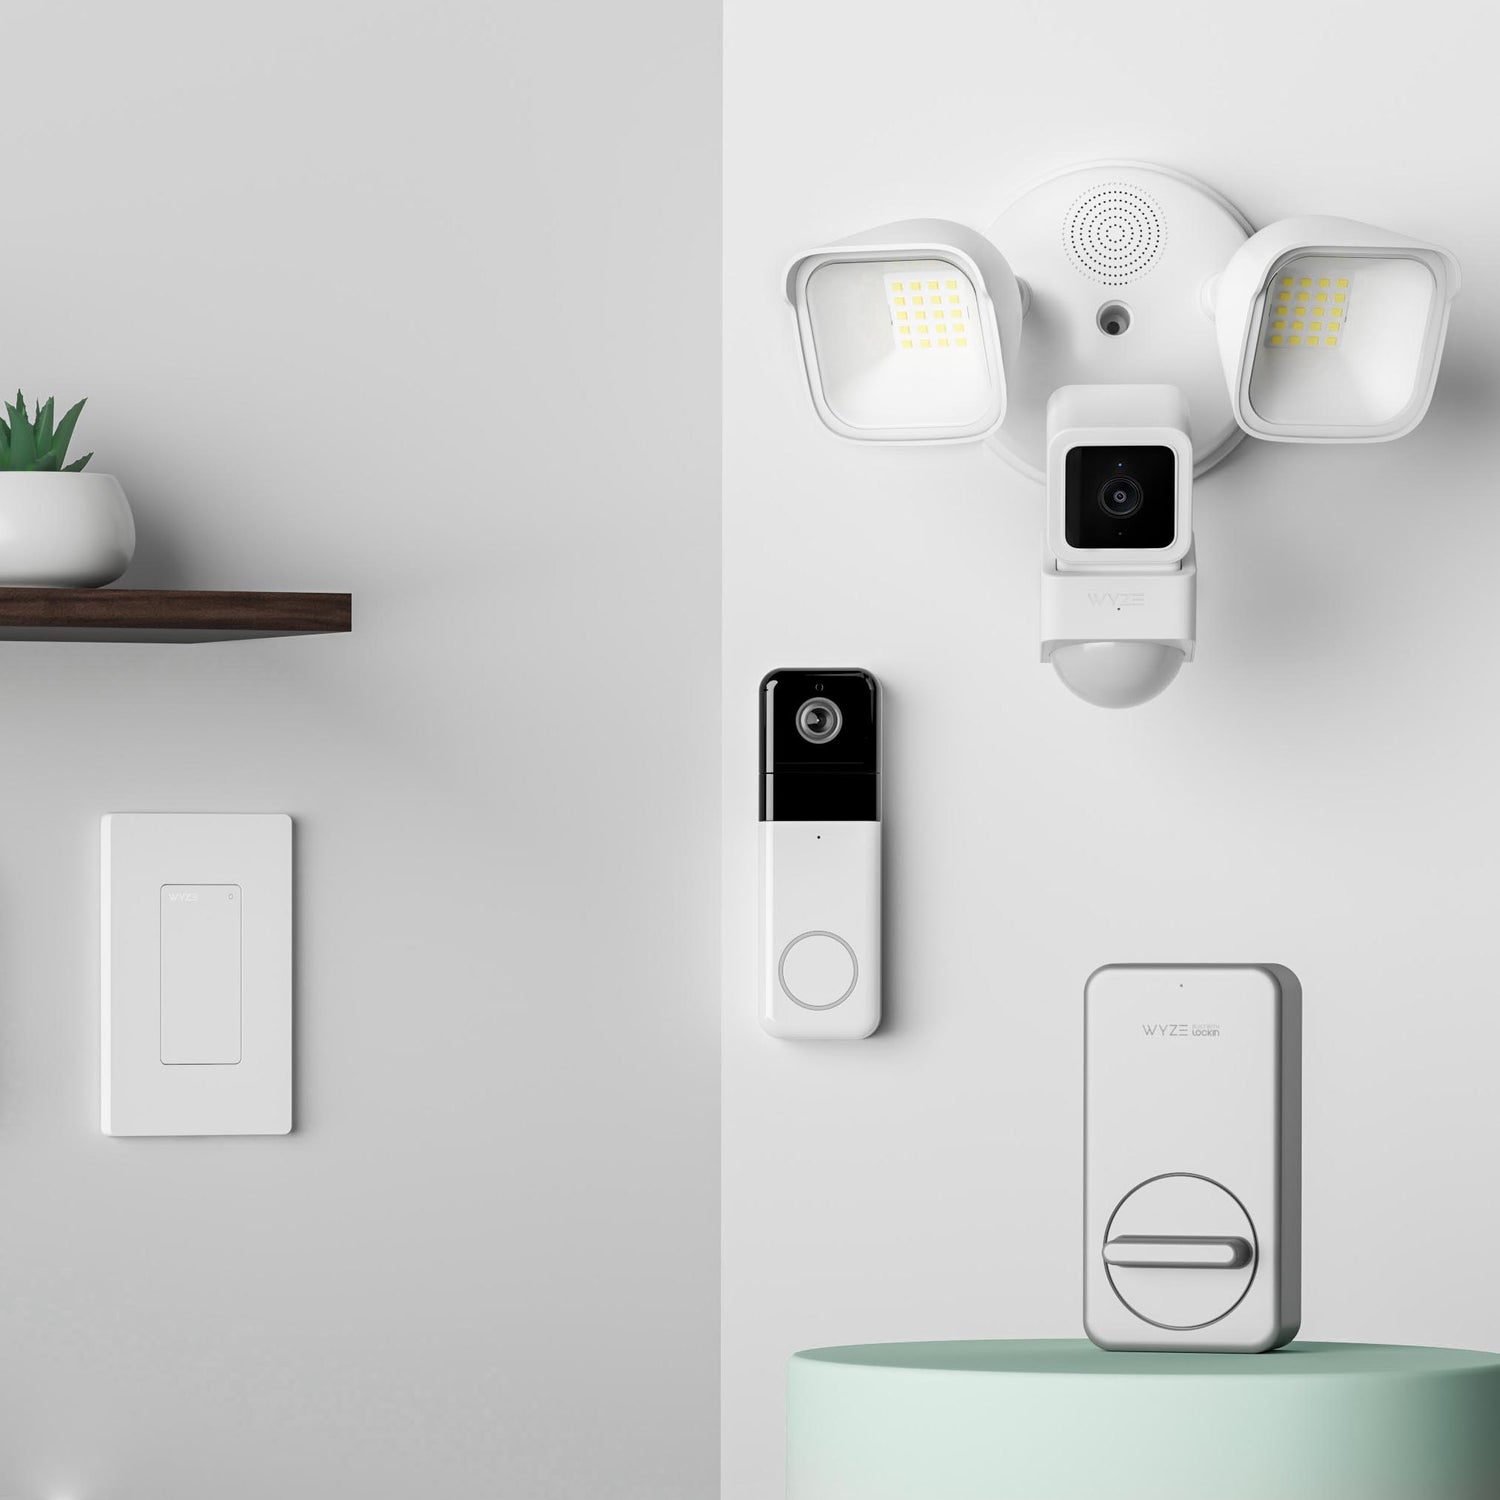 Wyze Plug review: Turning you on to quick and easy home automation